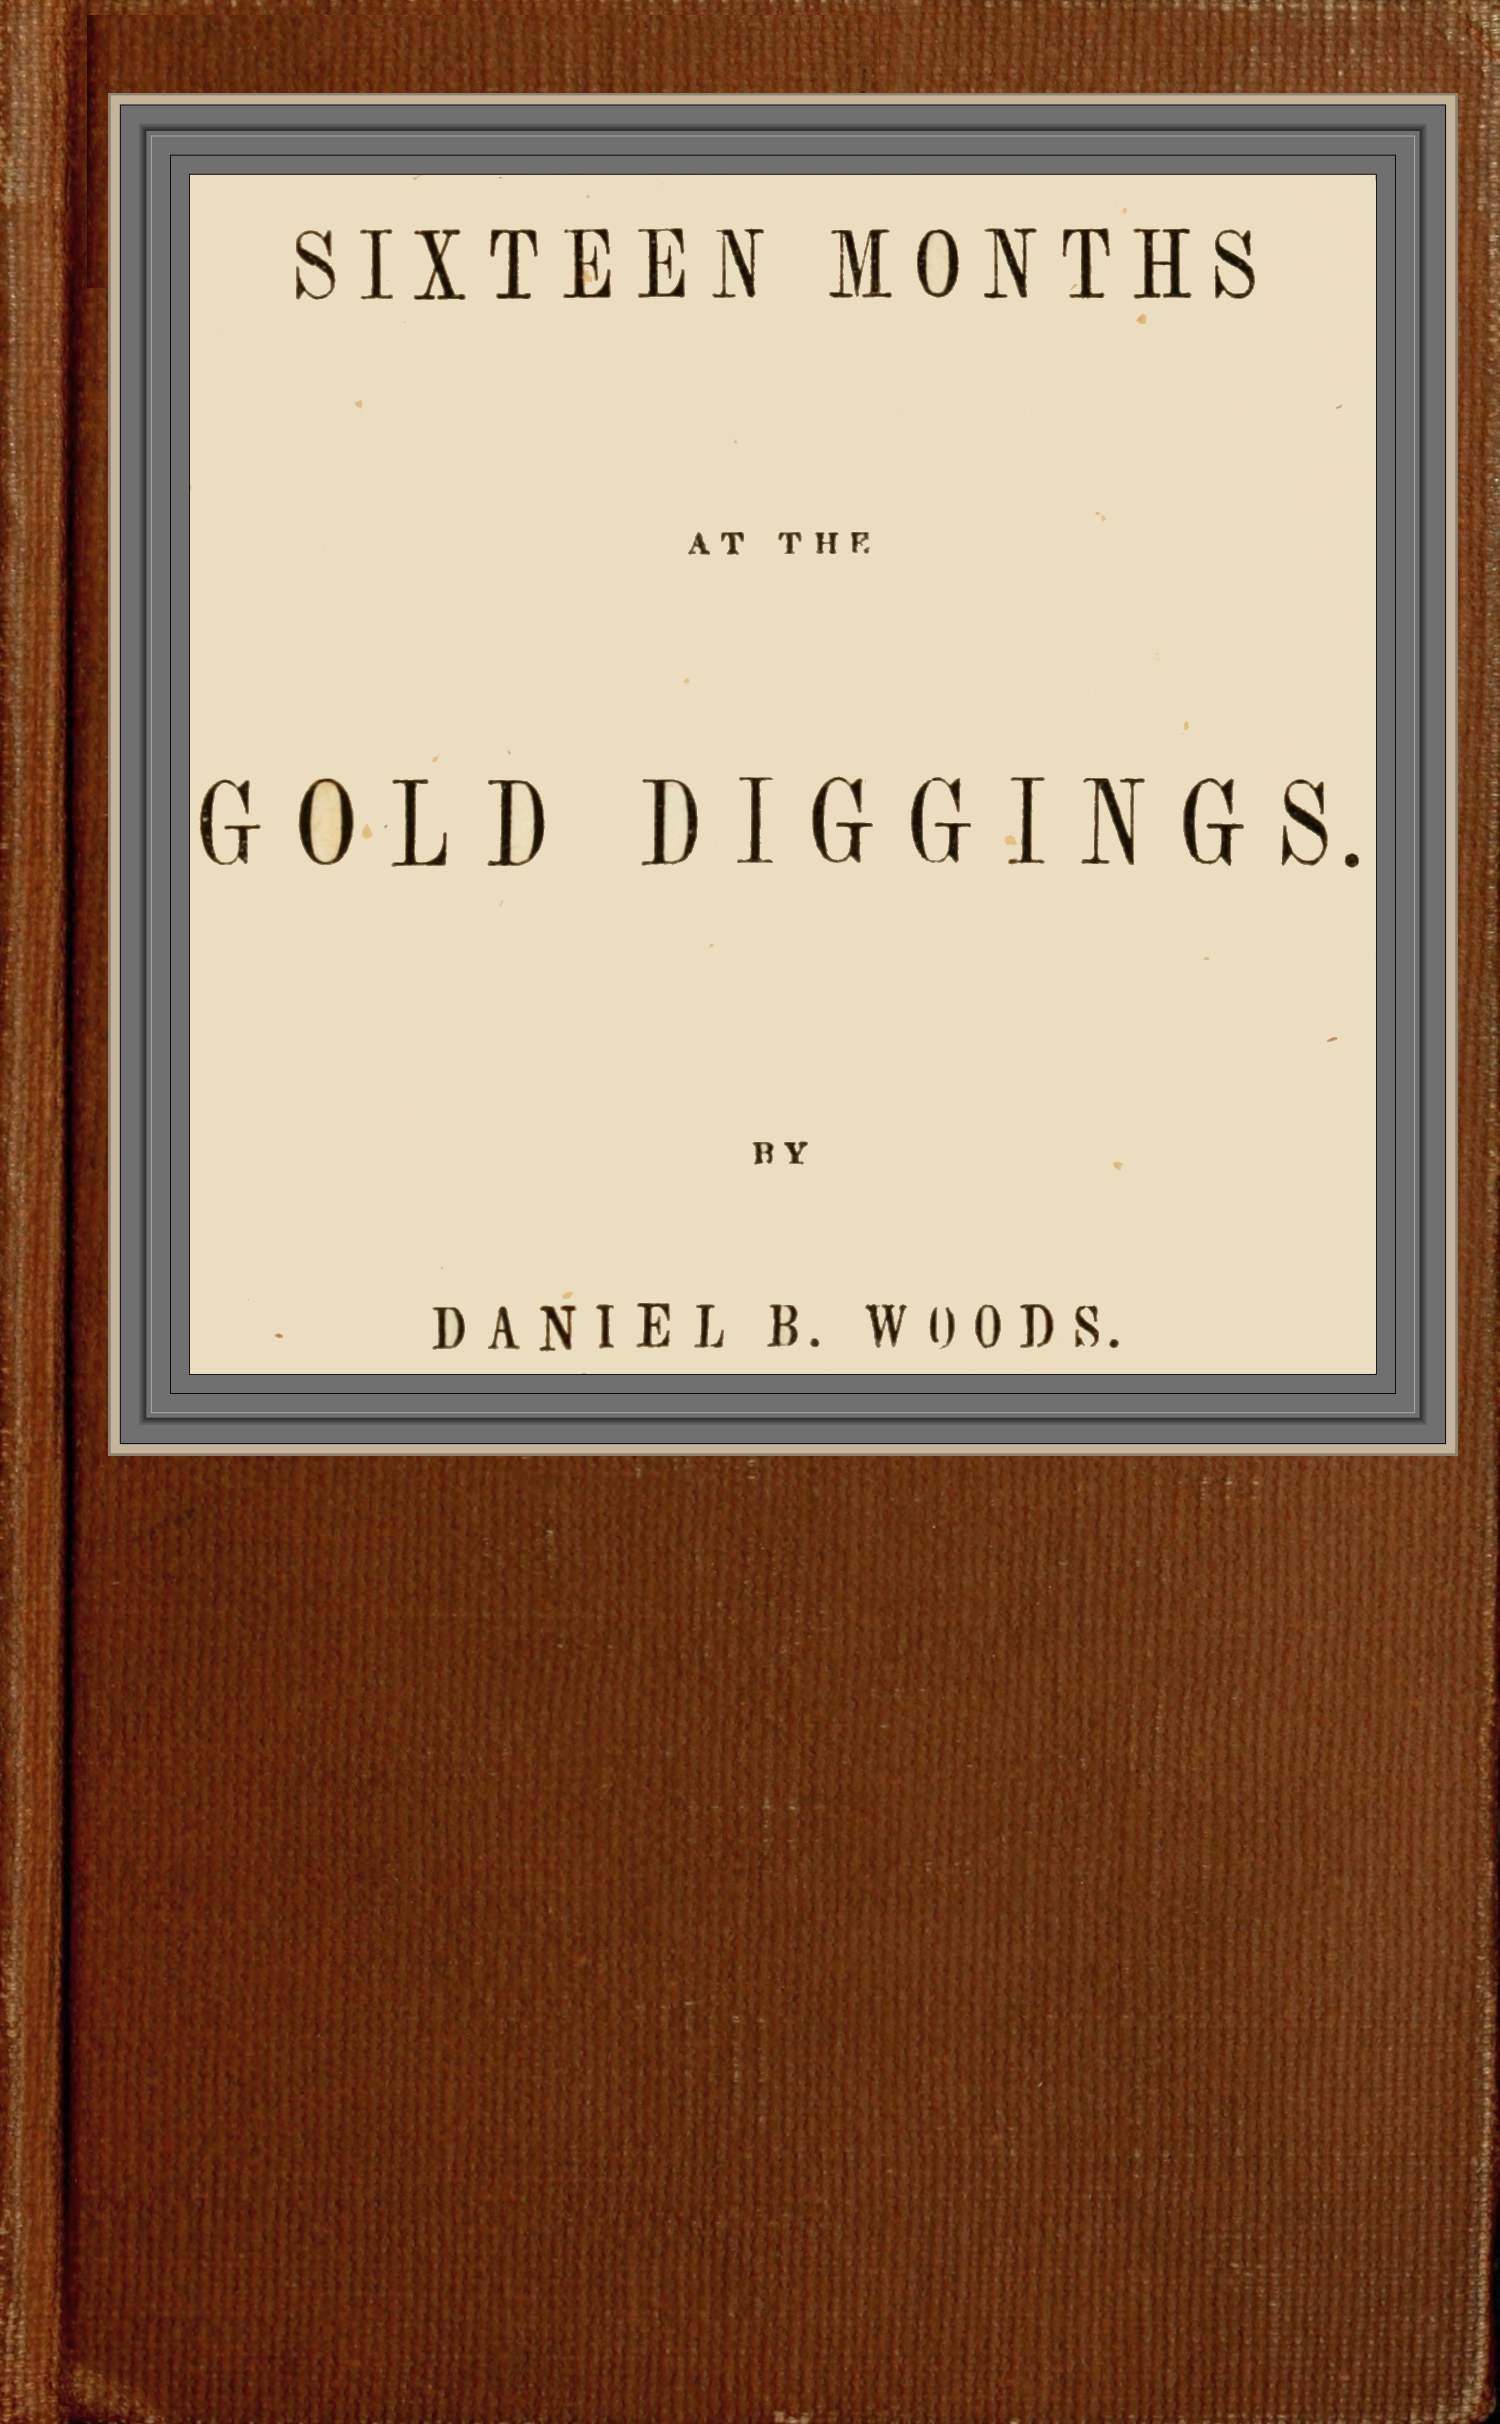 The Project Gutenberg eBook of Sixteen months at the gold diggings, by  Daniel B.